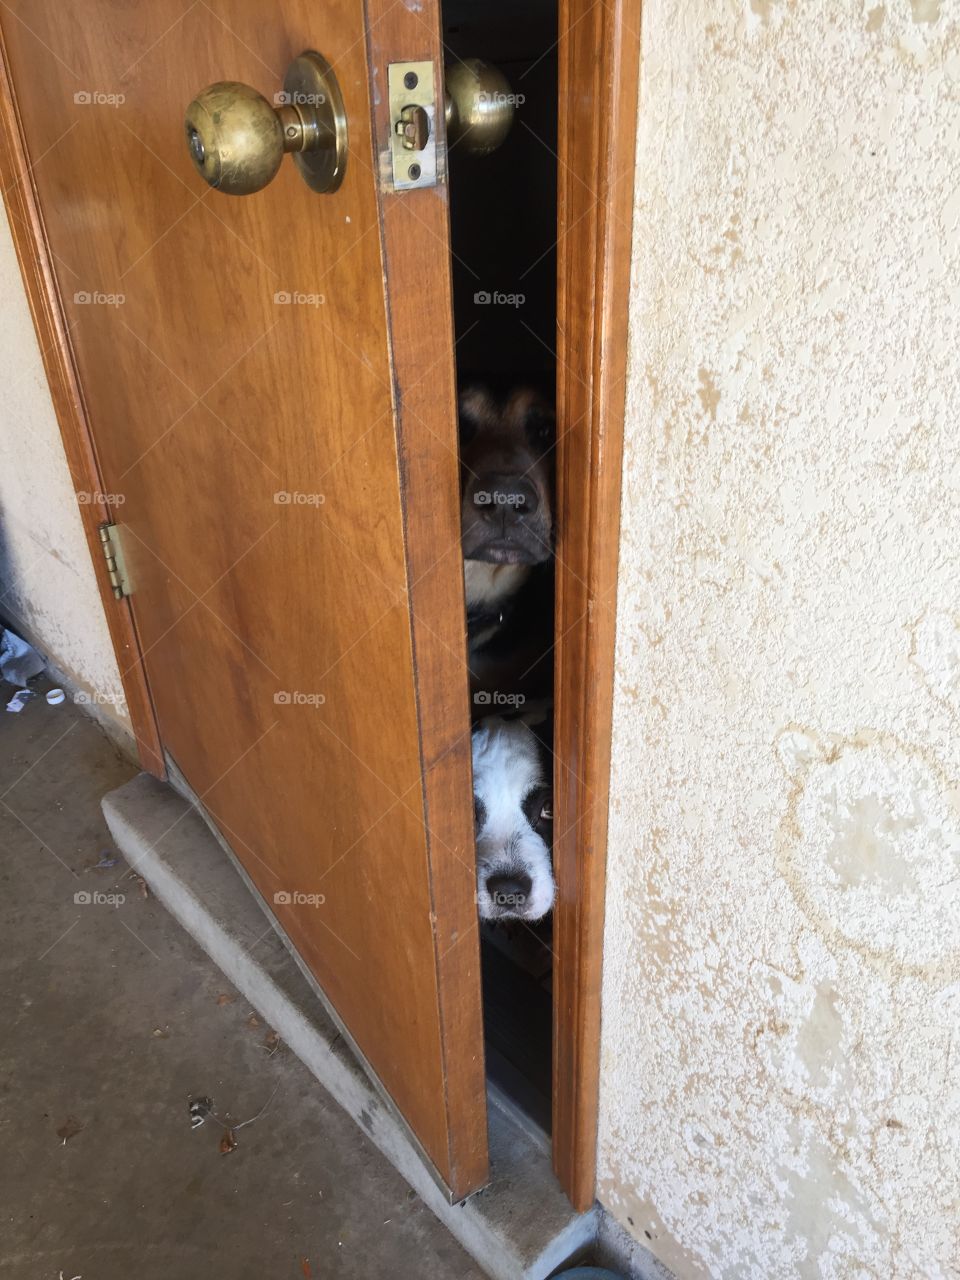 Dogs trying to creep outside.